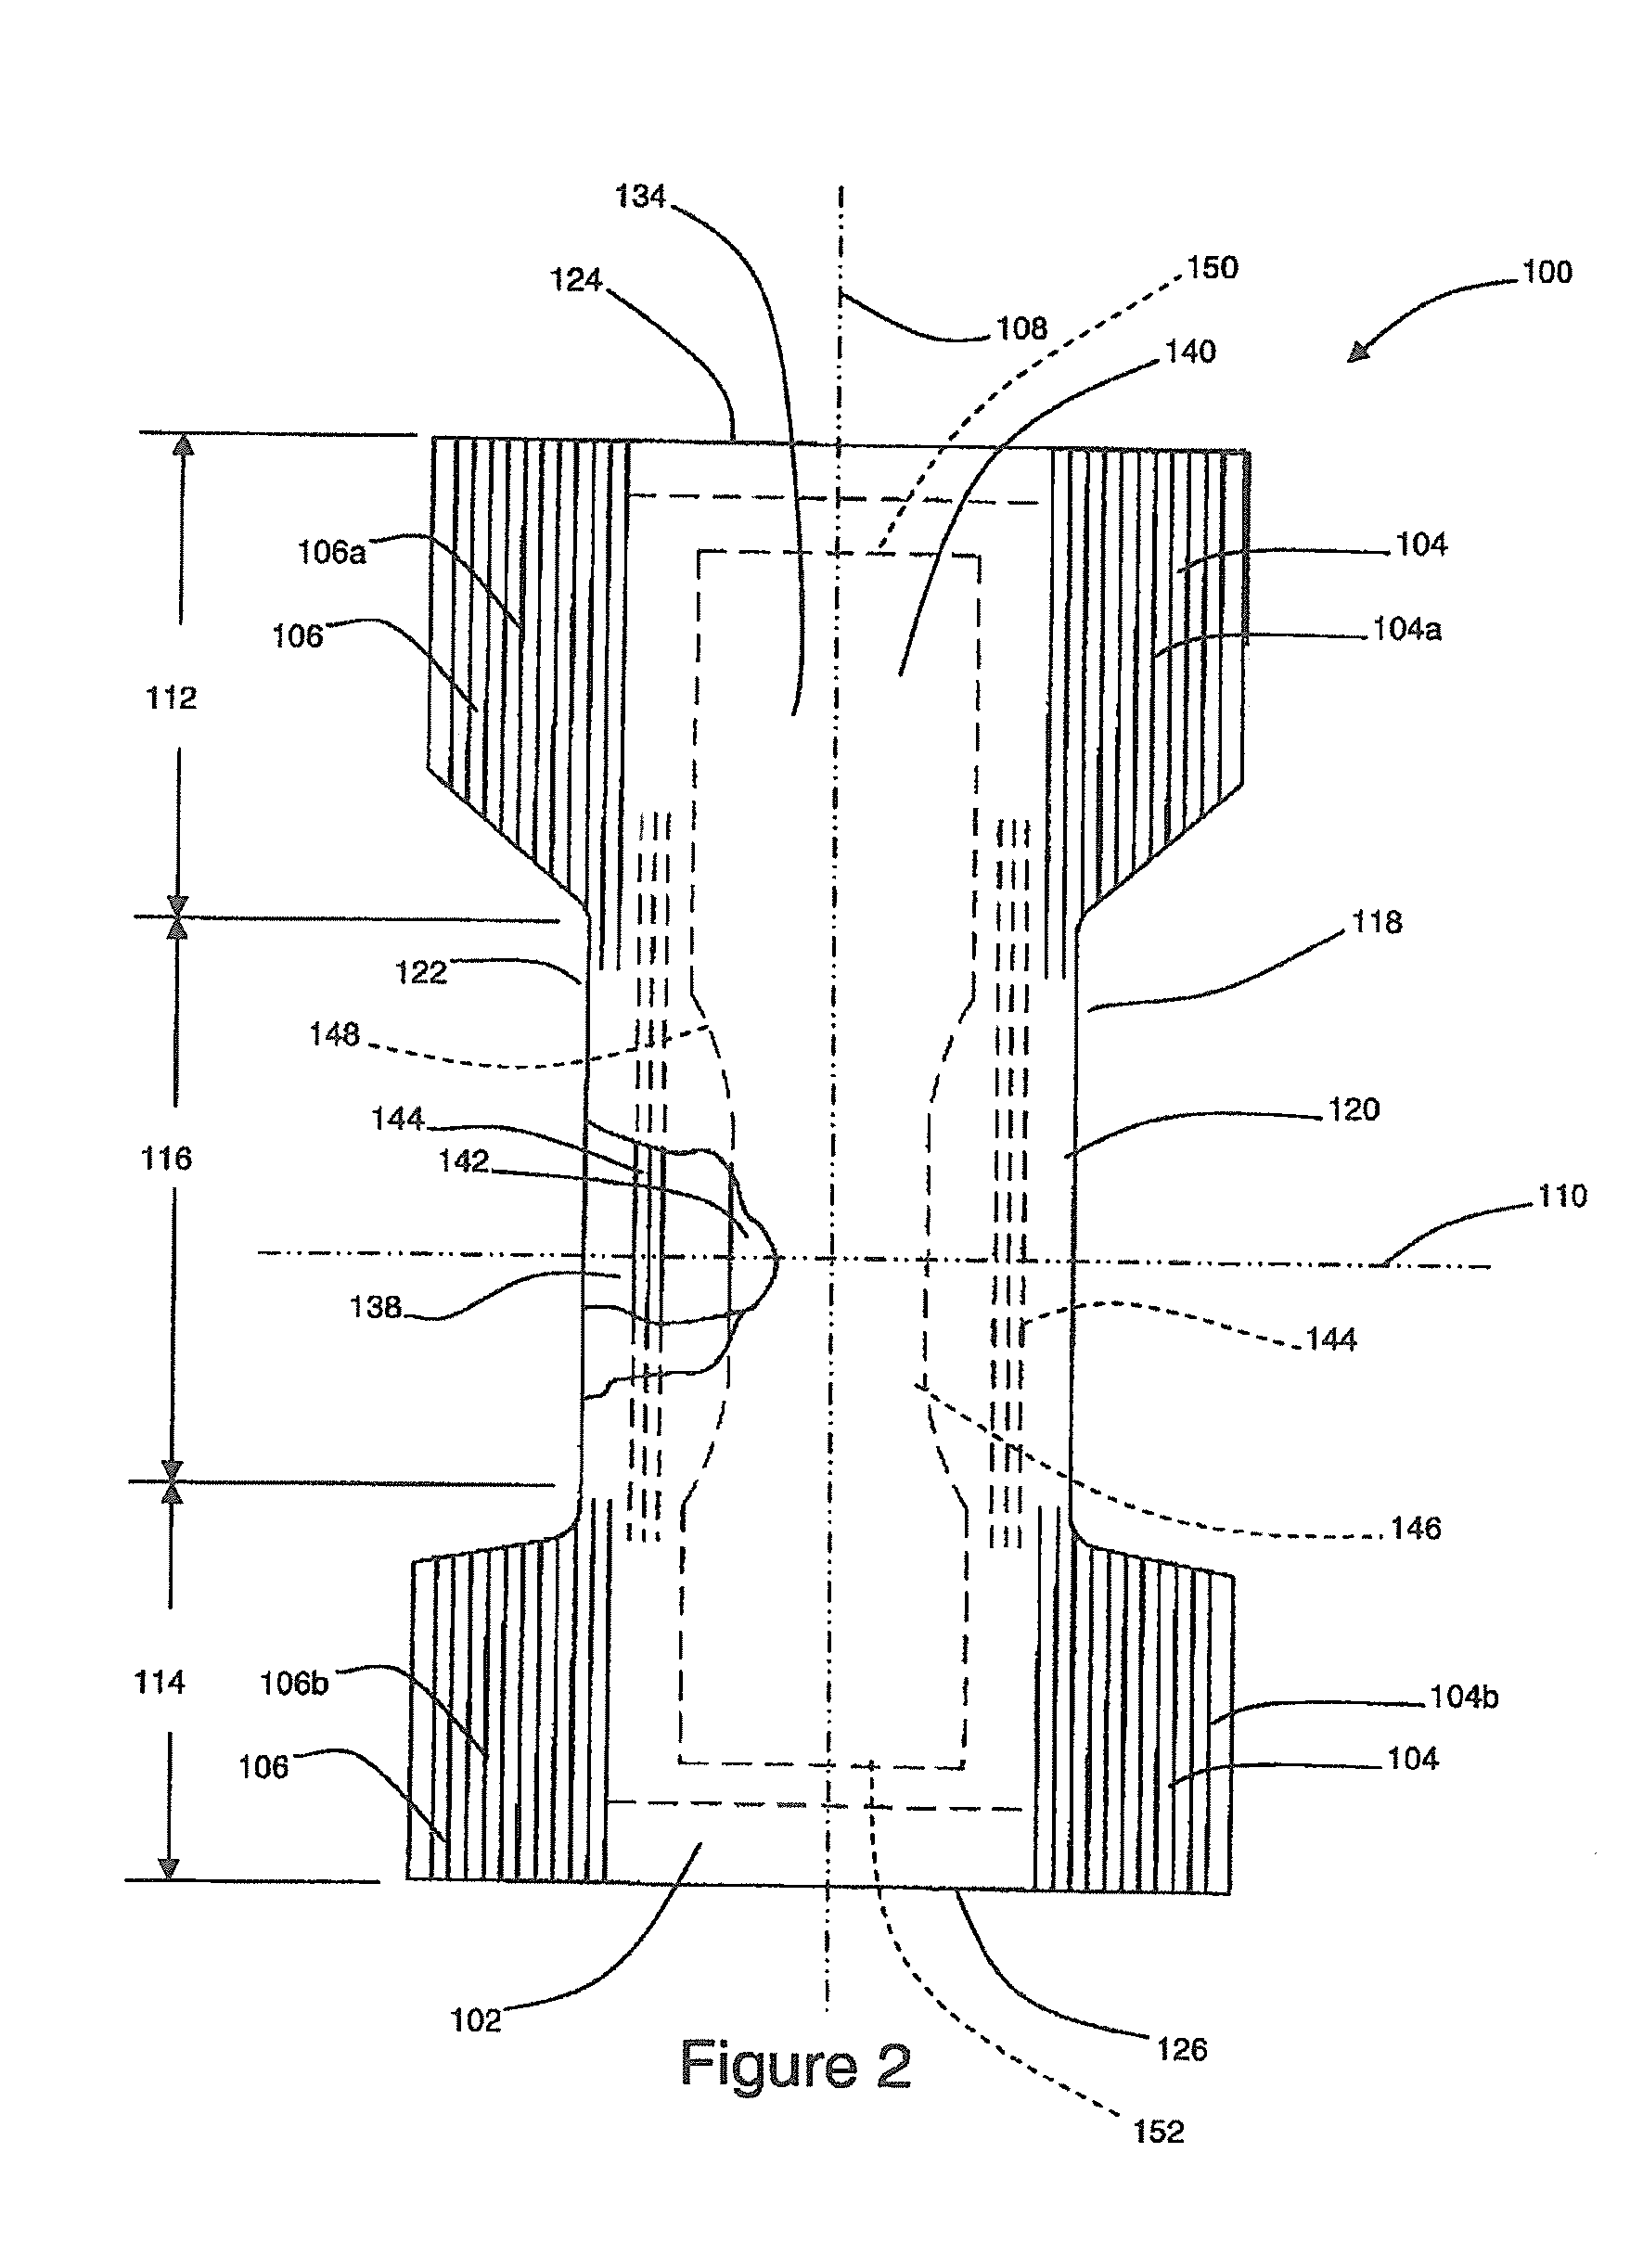 Methods and Apparatuses for Tucking Side Panels of Absorbent Articles